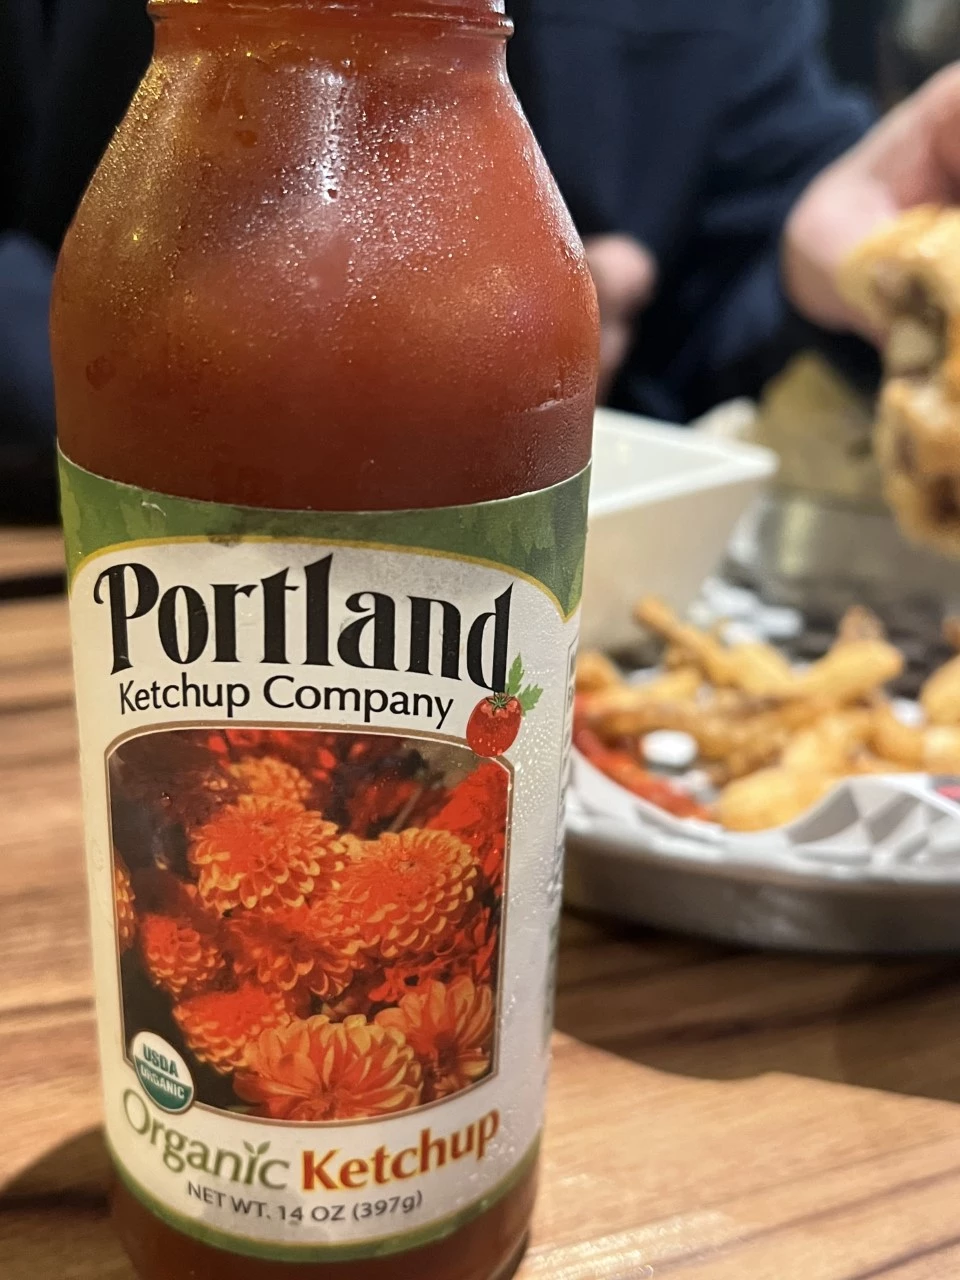 Say What? Have You Ever Experienced Portlands Popular Ketchup?